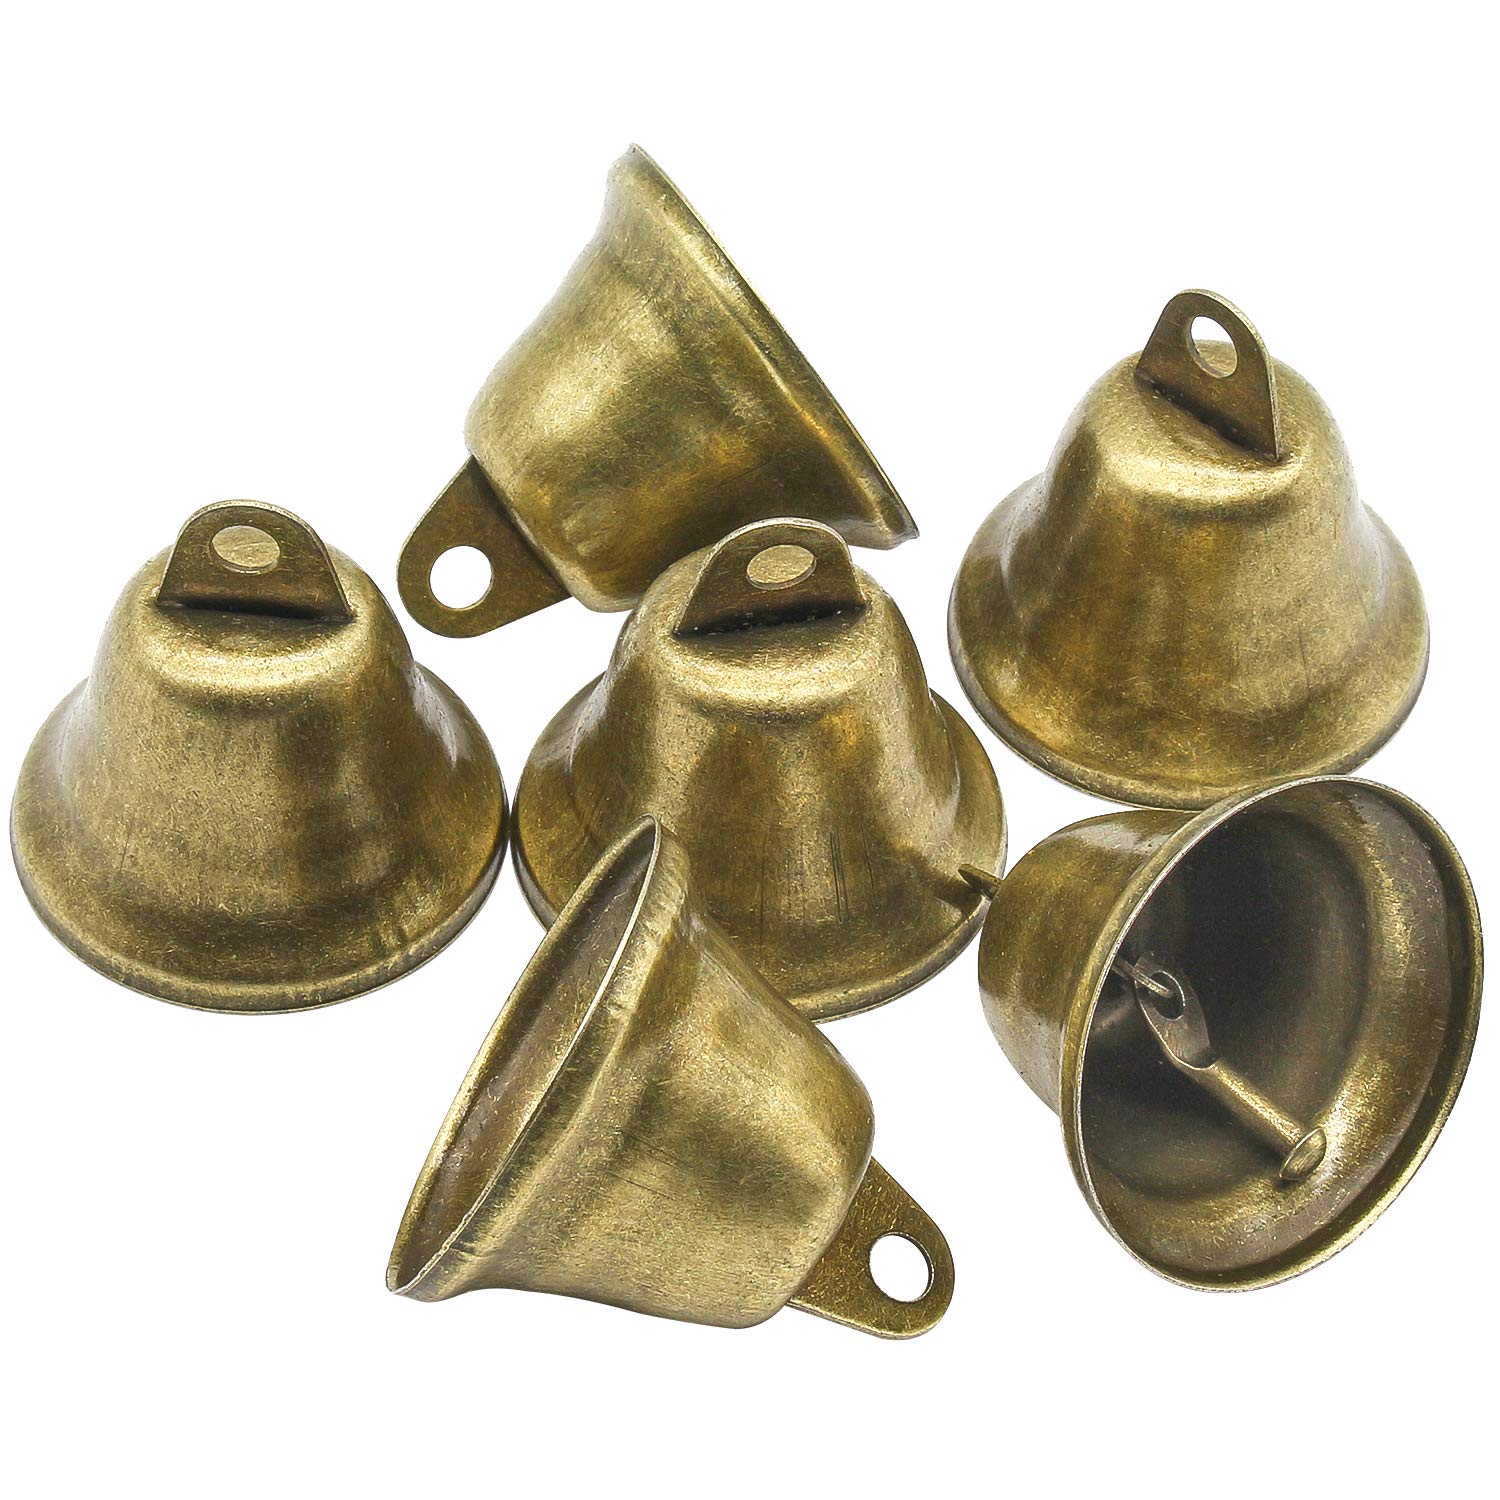 Favordrory 70PCS 38mm/1.5inch Vintage Bronze Jingle Bells, Craft Bells for  Dog Potty Training, Housebreaking, Making Wind Chimes, Christmas Bell and  etc